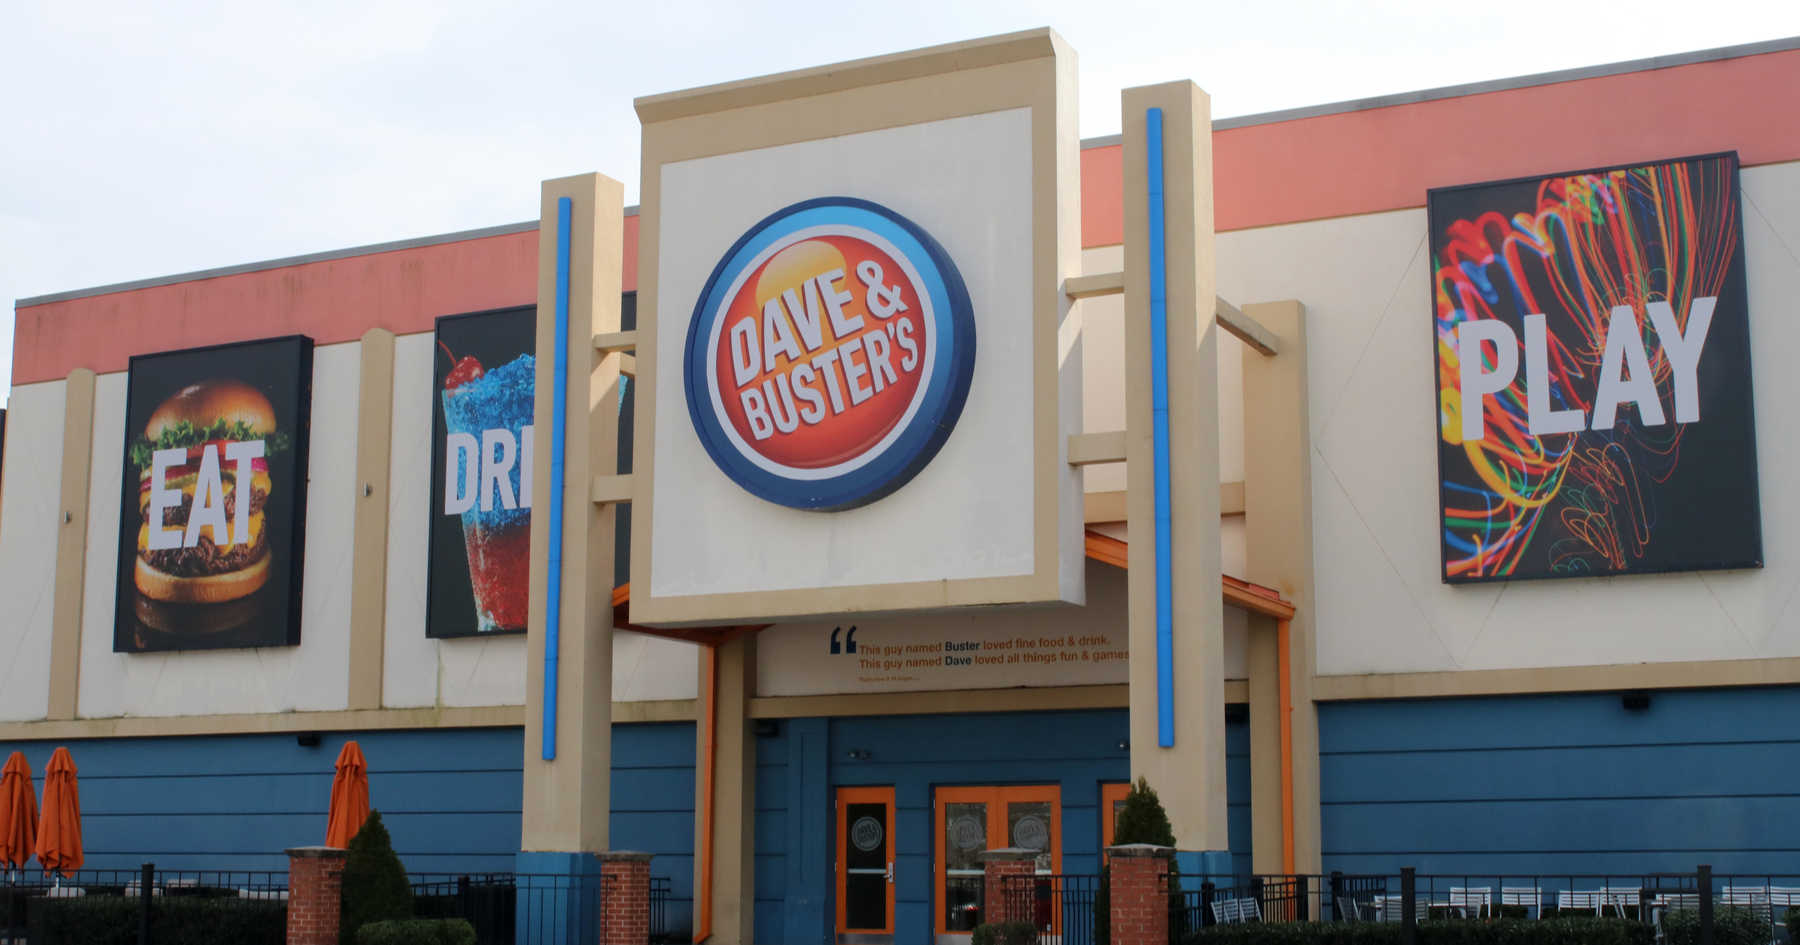 Dave and Busters Coupons